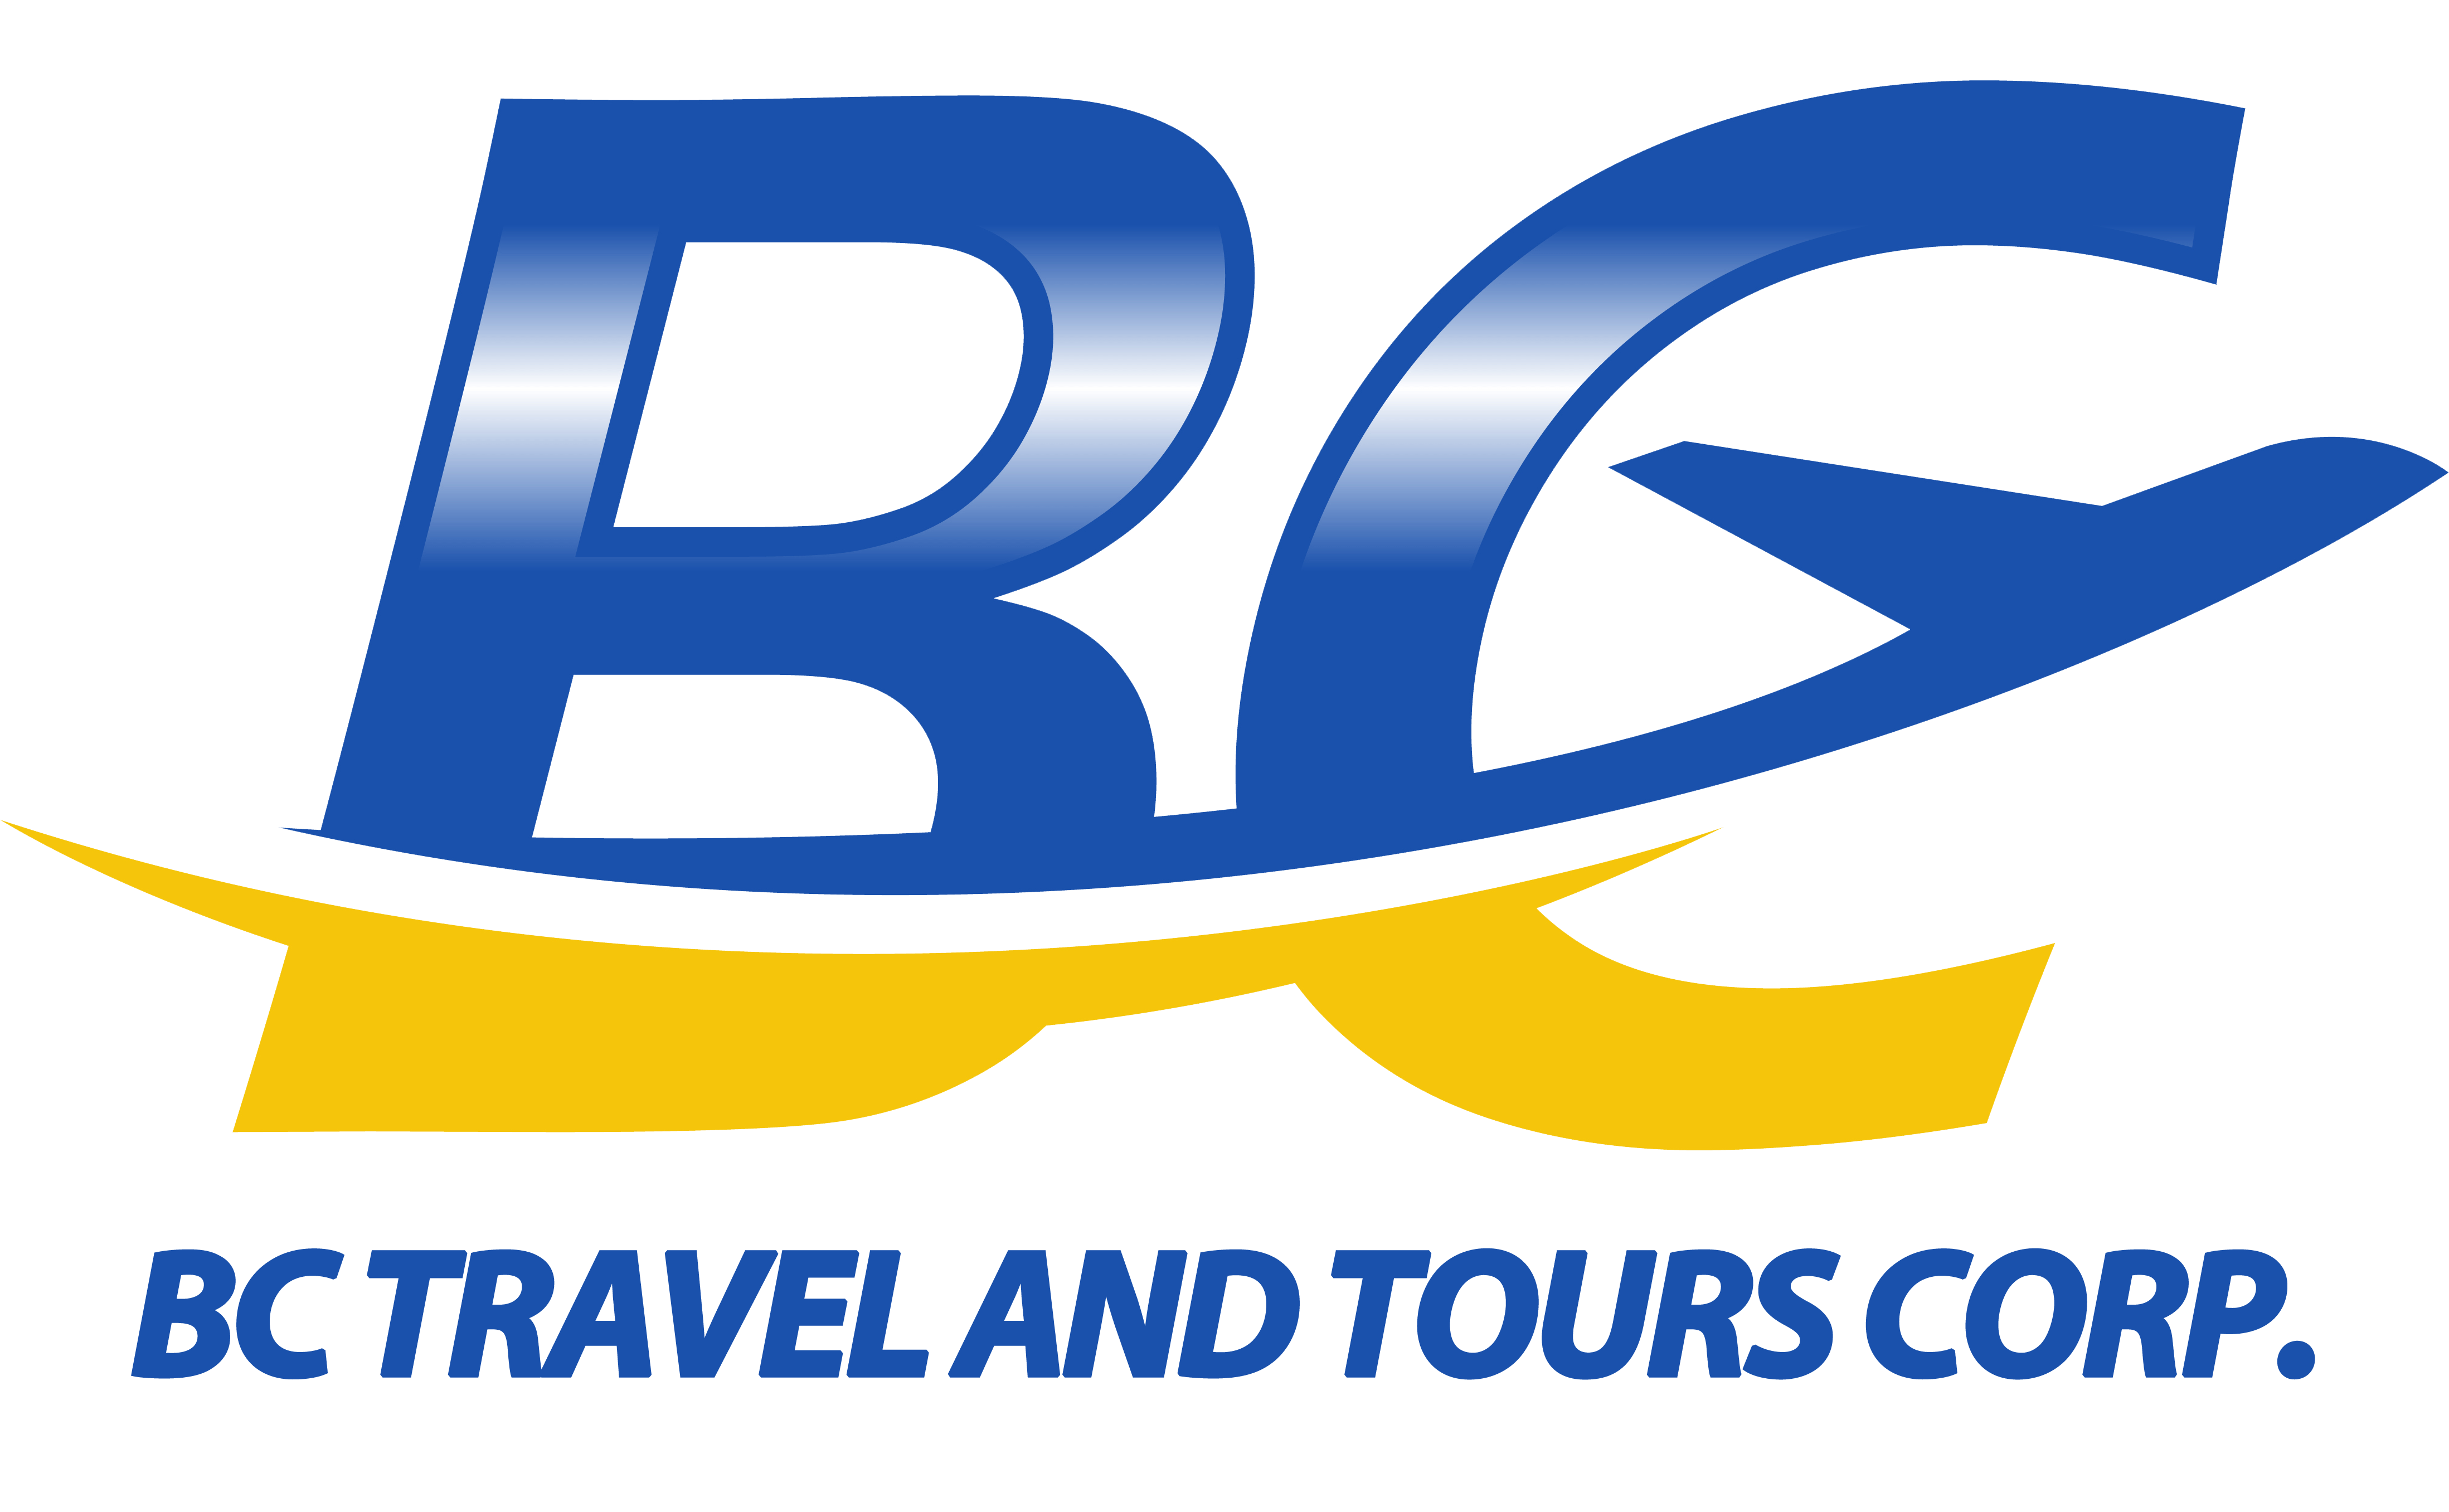 BC Logo - BC LOGO | BC Travel and Tours Corp - Cheap Flights and Vacation Packages